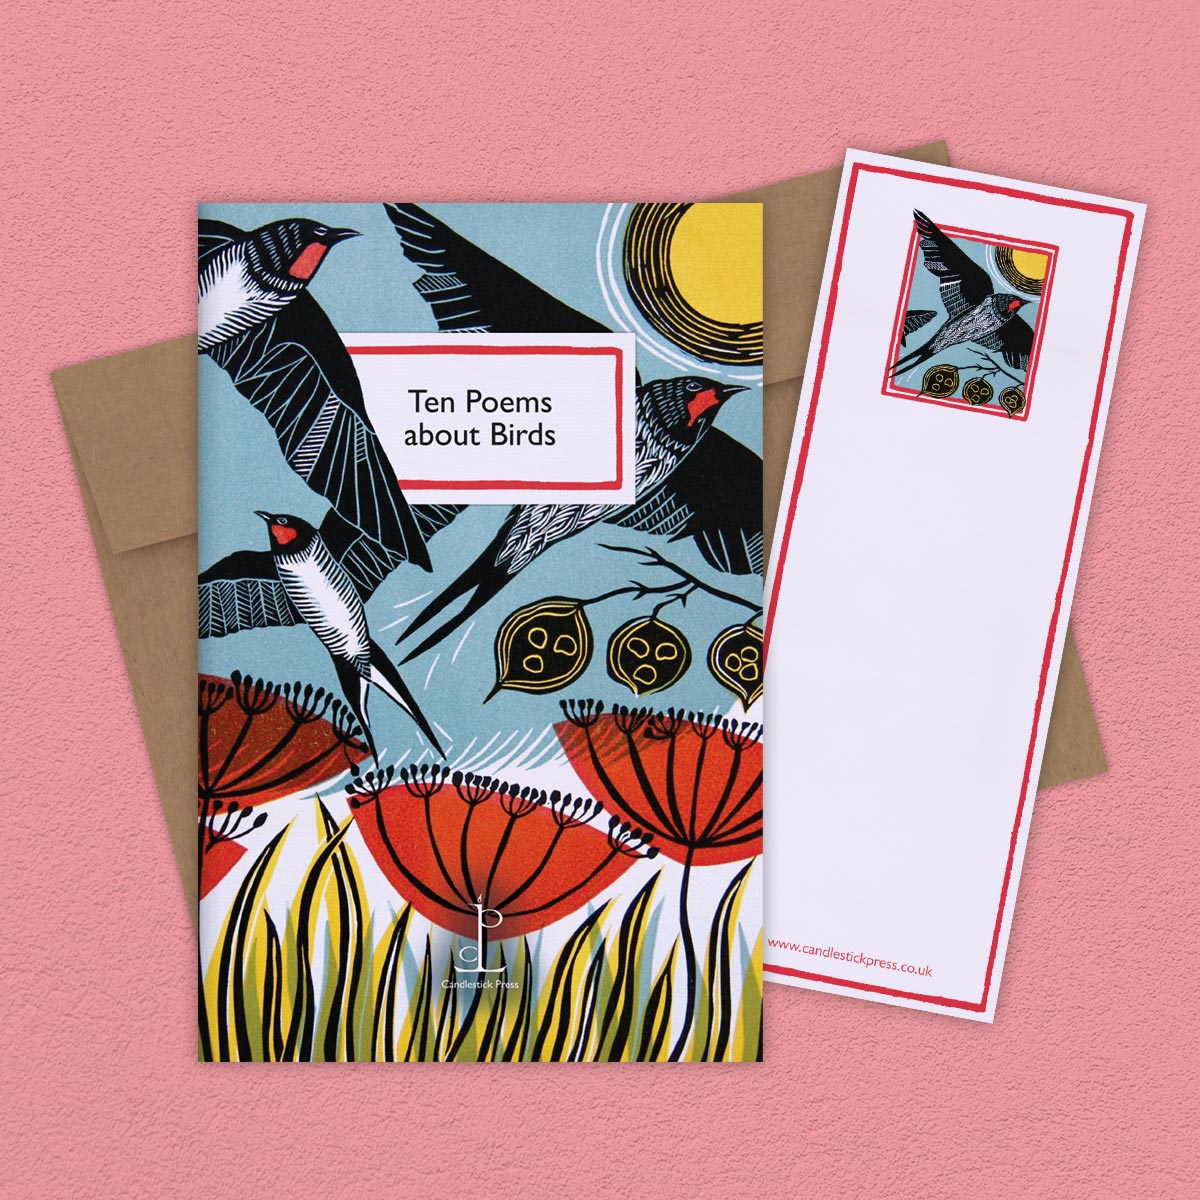 The Poem Pamphlet, 'Ten Poems about Birds' sits on a Rose coloured background with the bookmark and brown envelope.